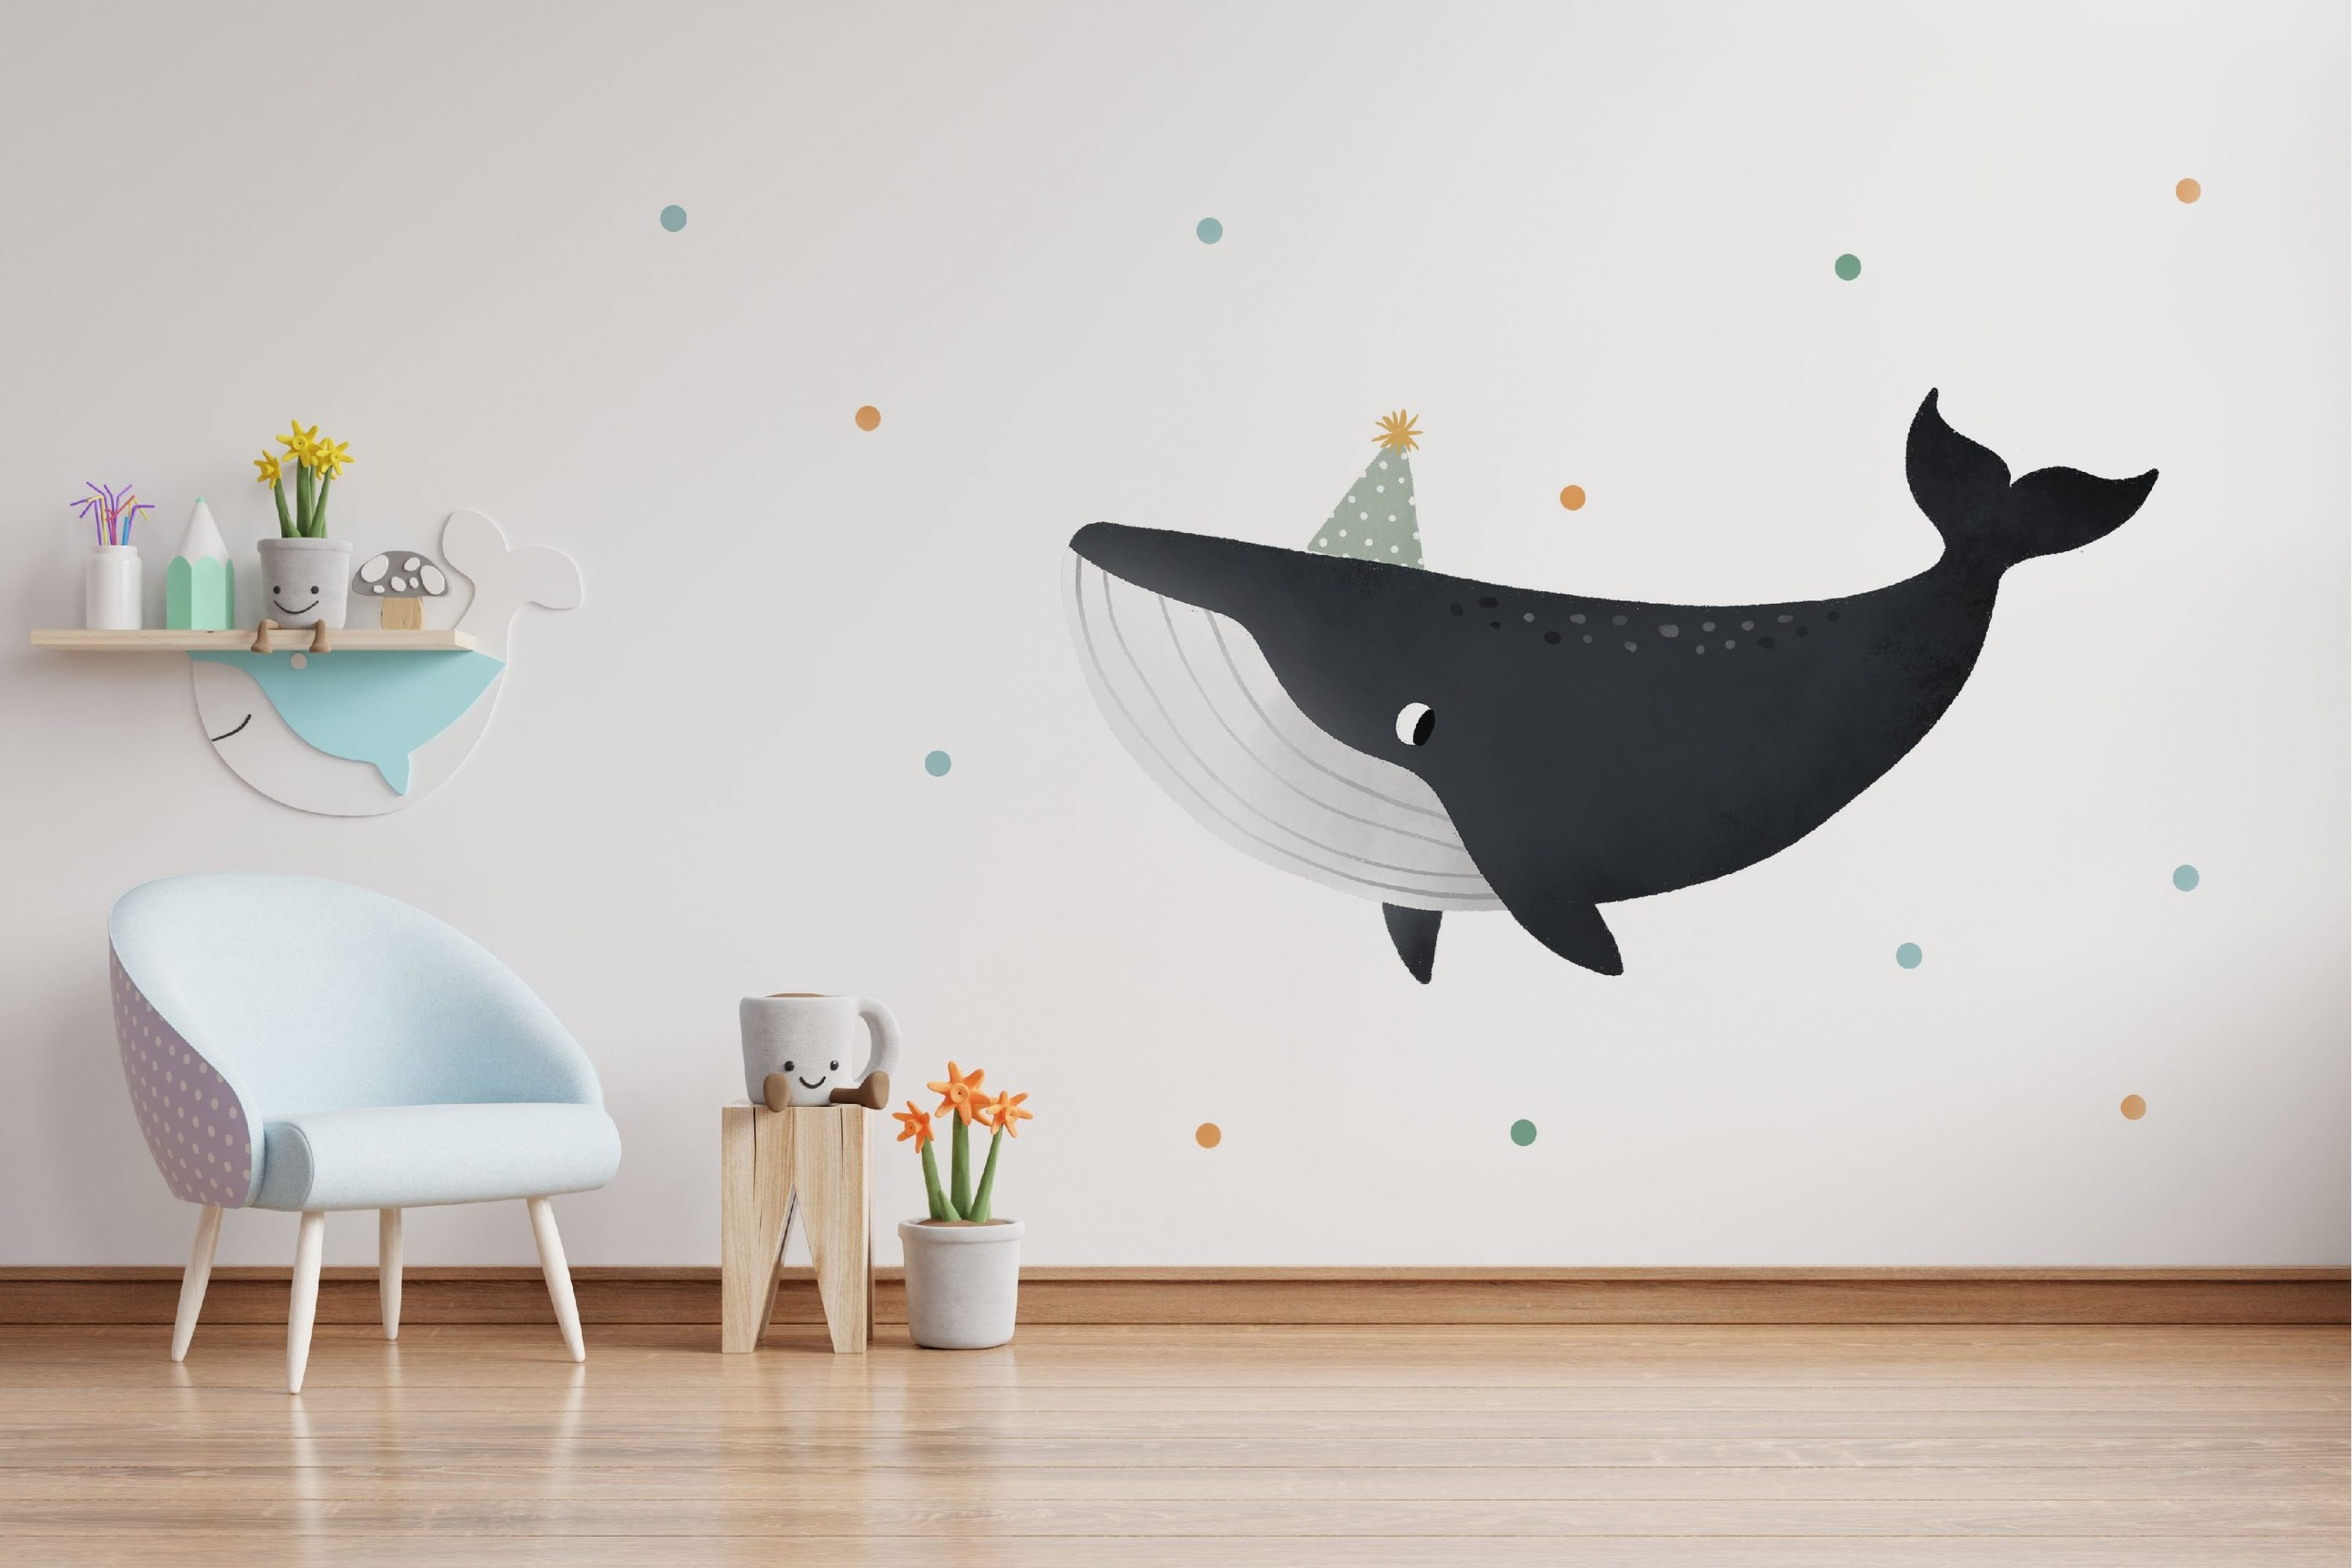 The big whale on the wall.